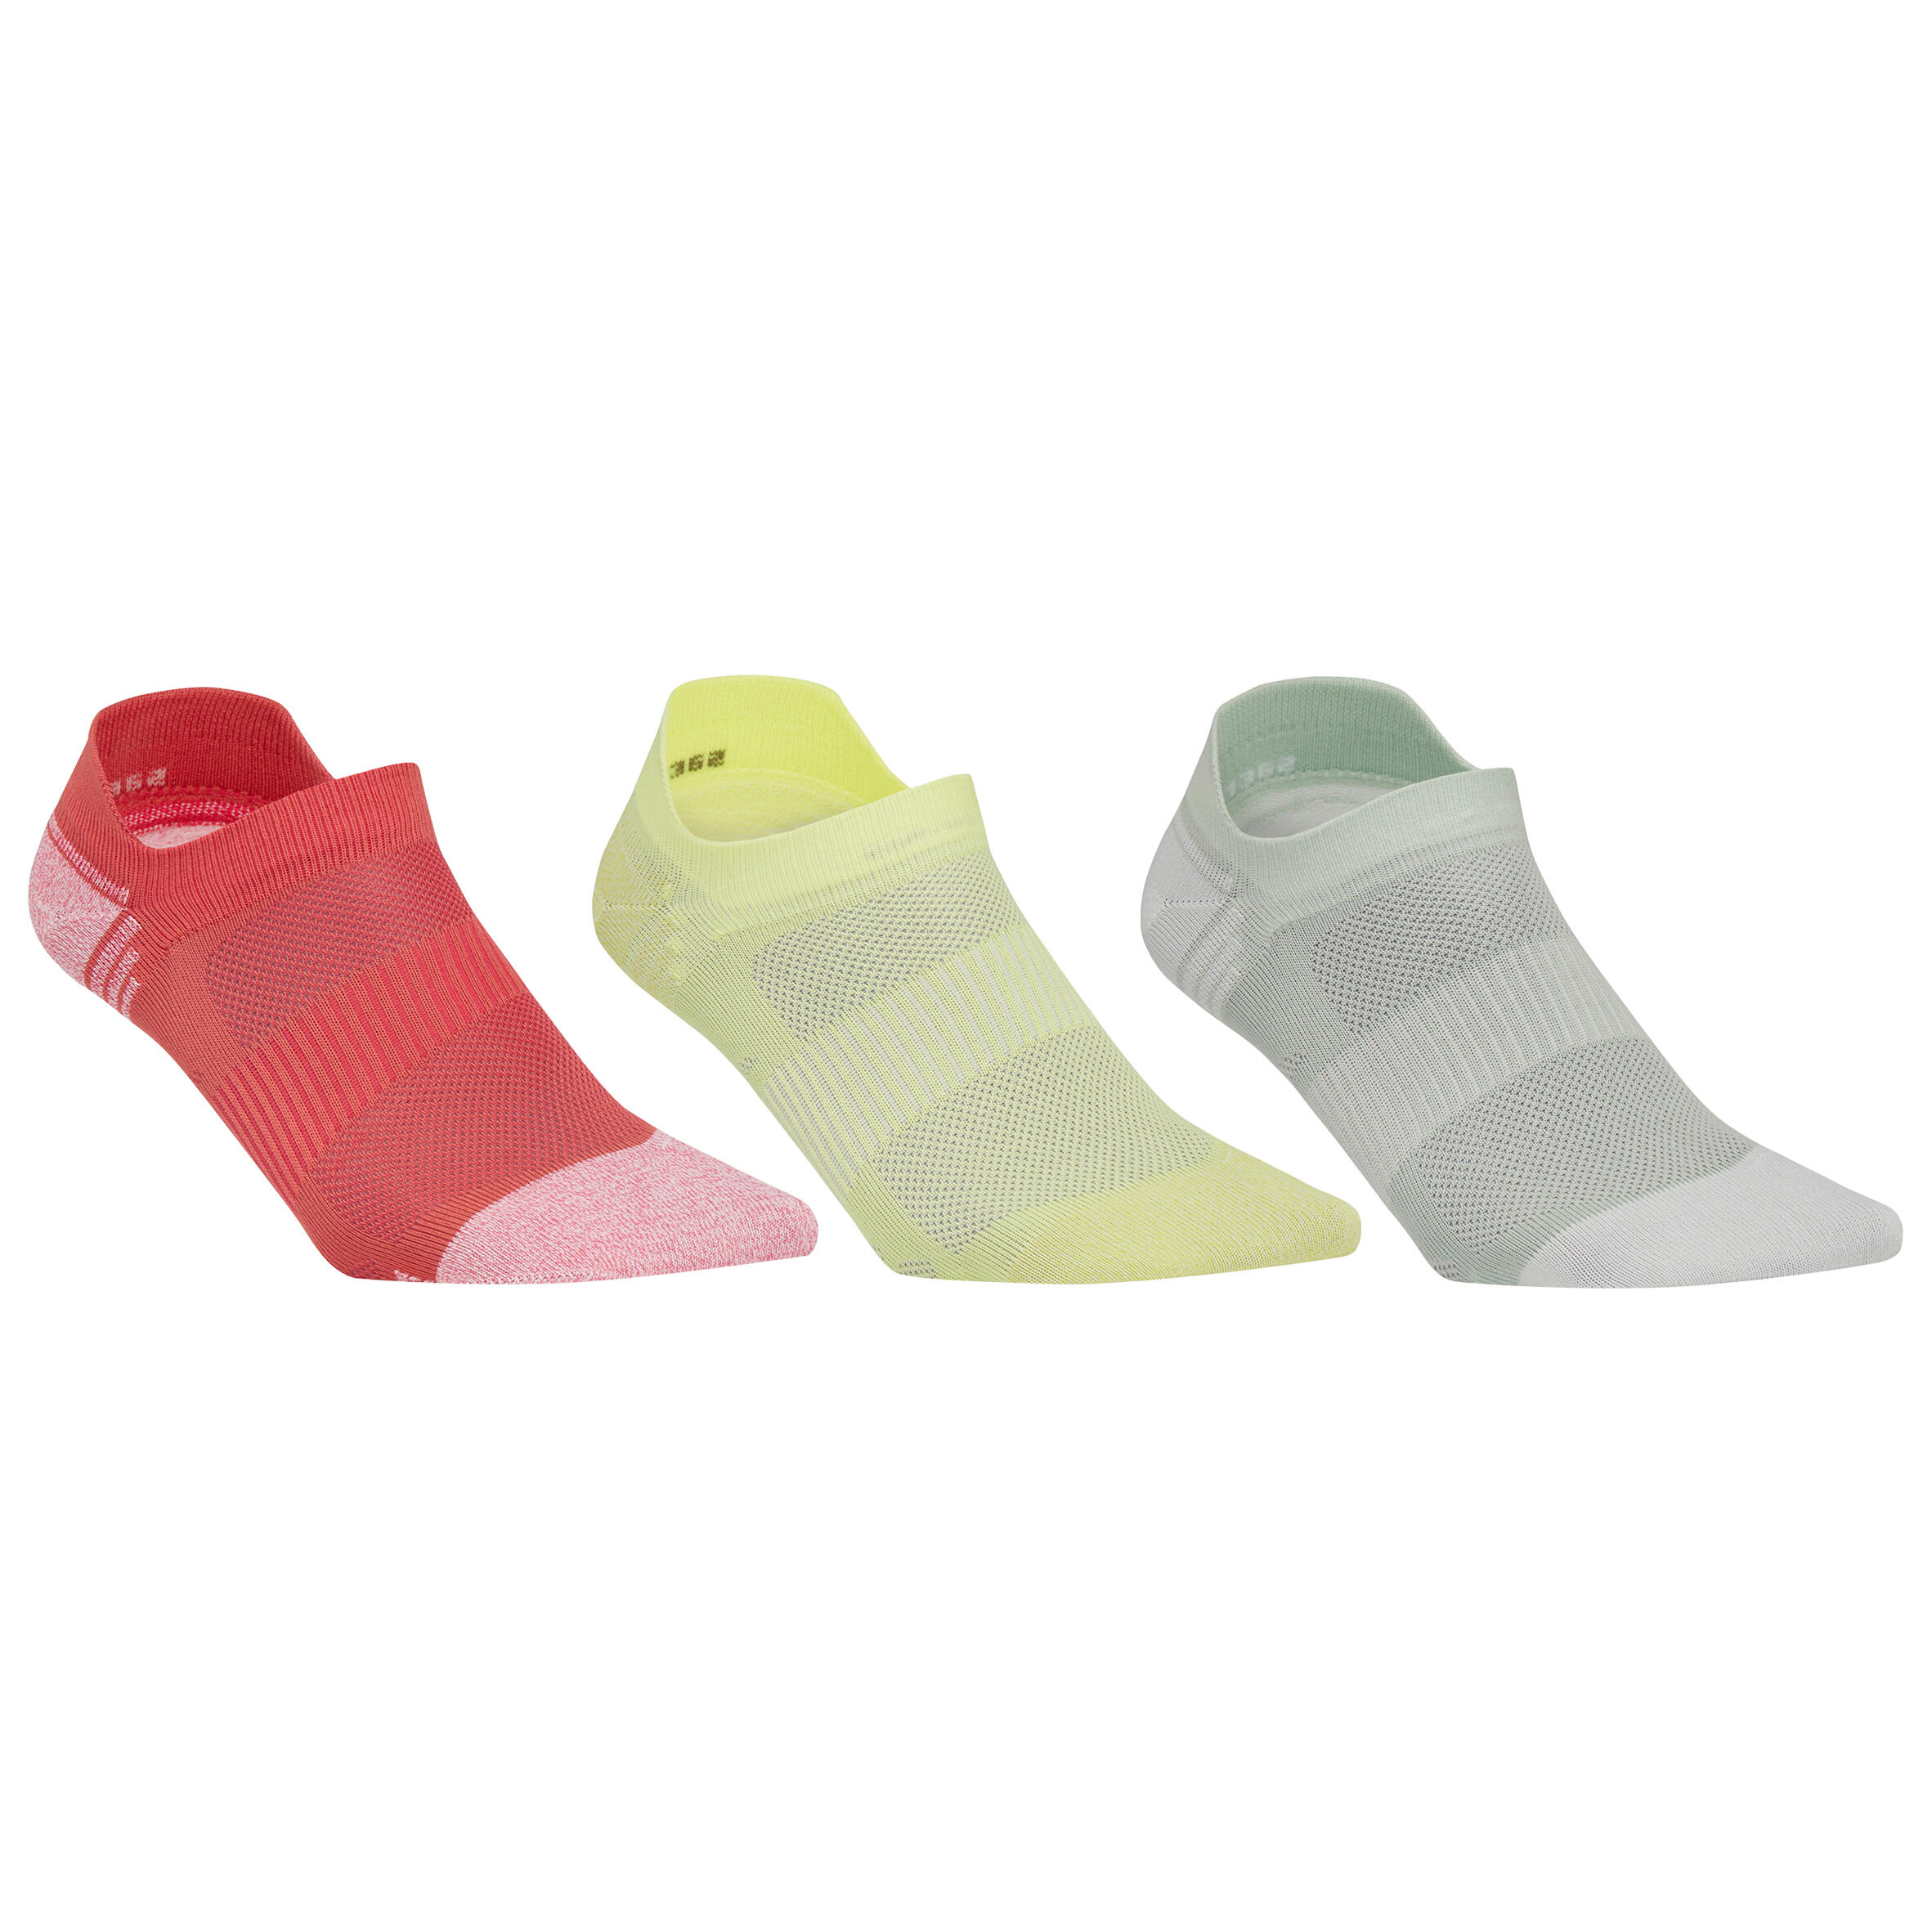 NEWFEEL WS 500 Invisible Fresh Active and Nordic Walking Socks - Pink/Yellow/Green